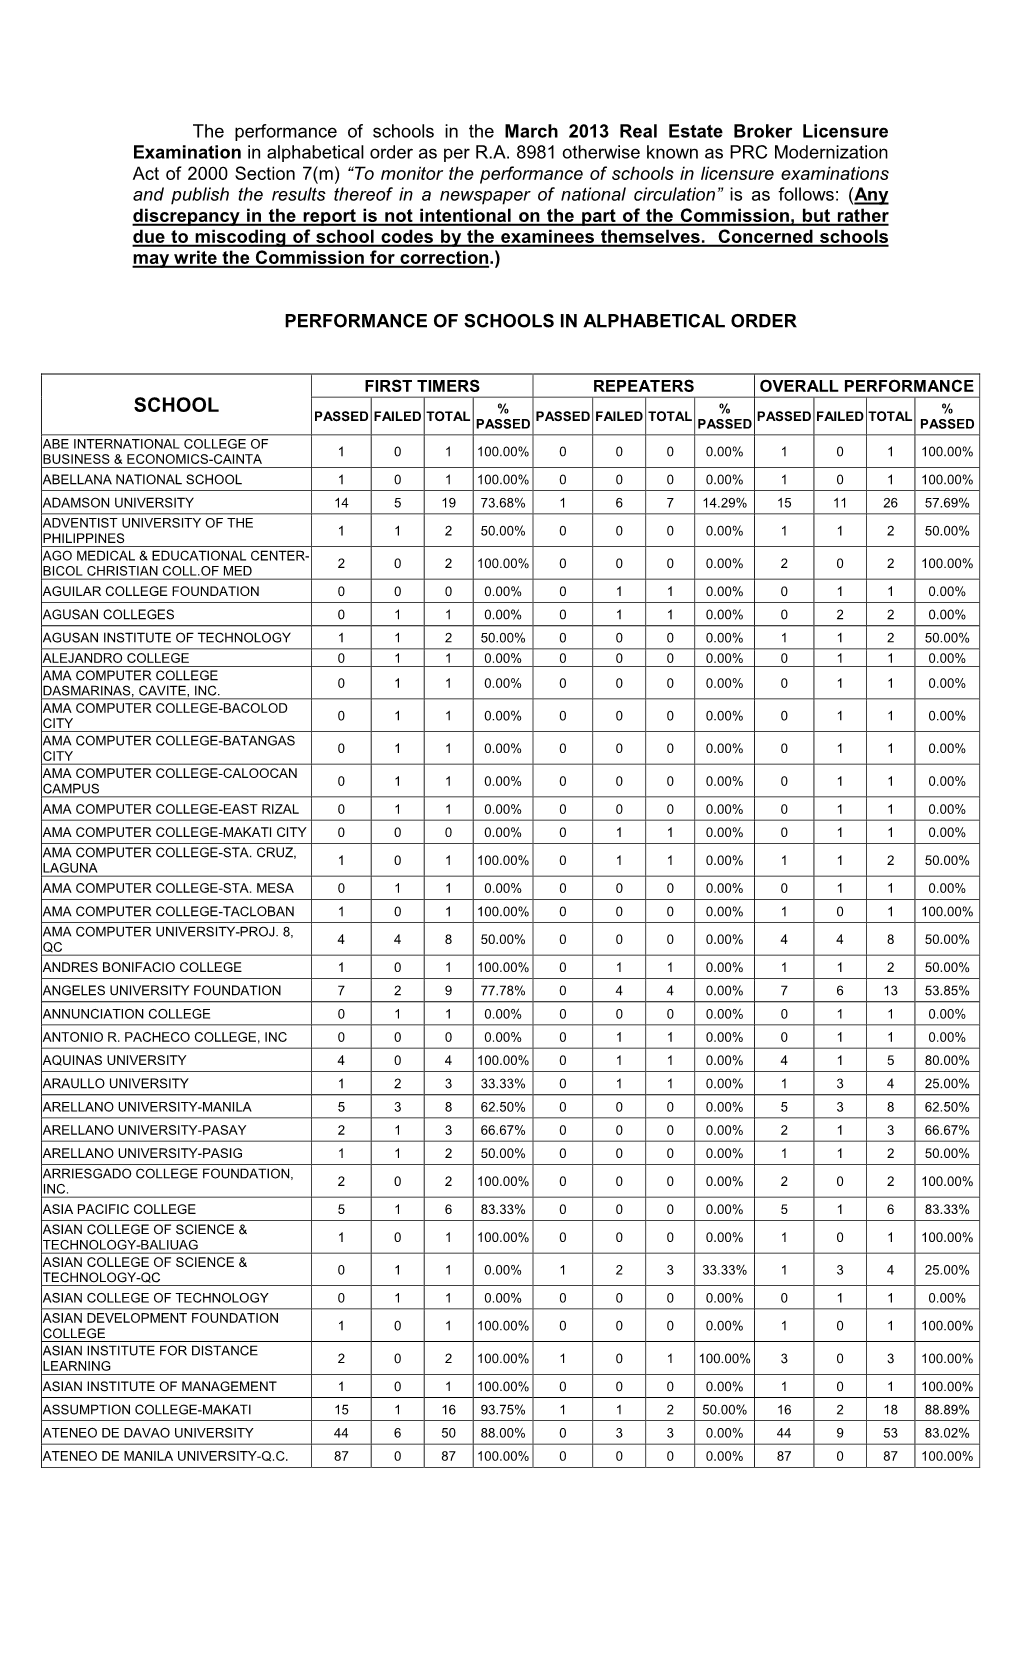 Schools in the March 2013 Real Estate Broker Licensure Examination in Alphabetical Order As Per R.A